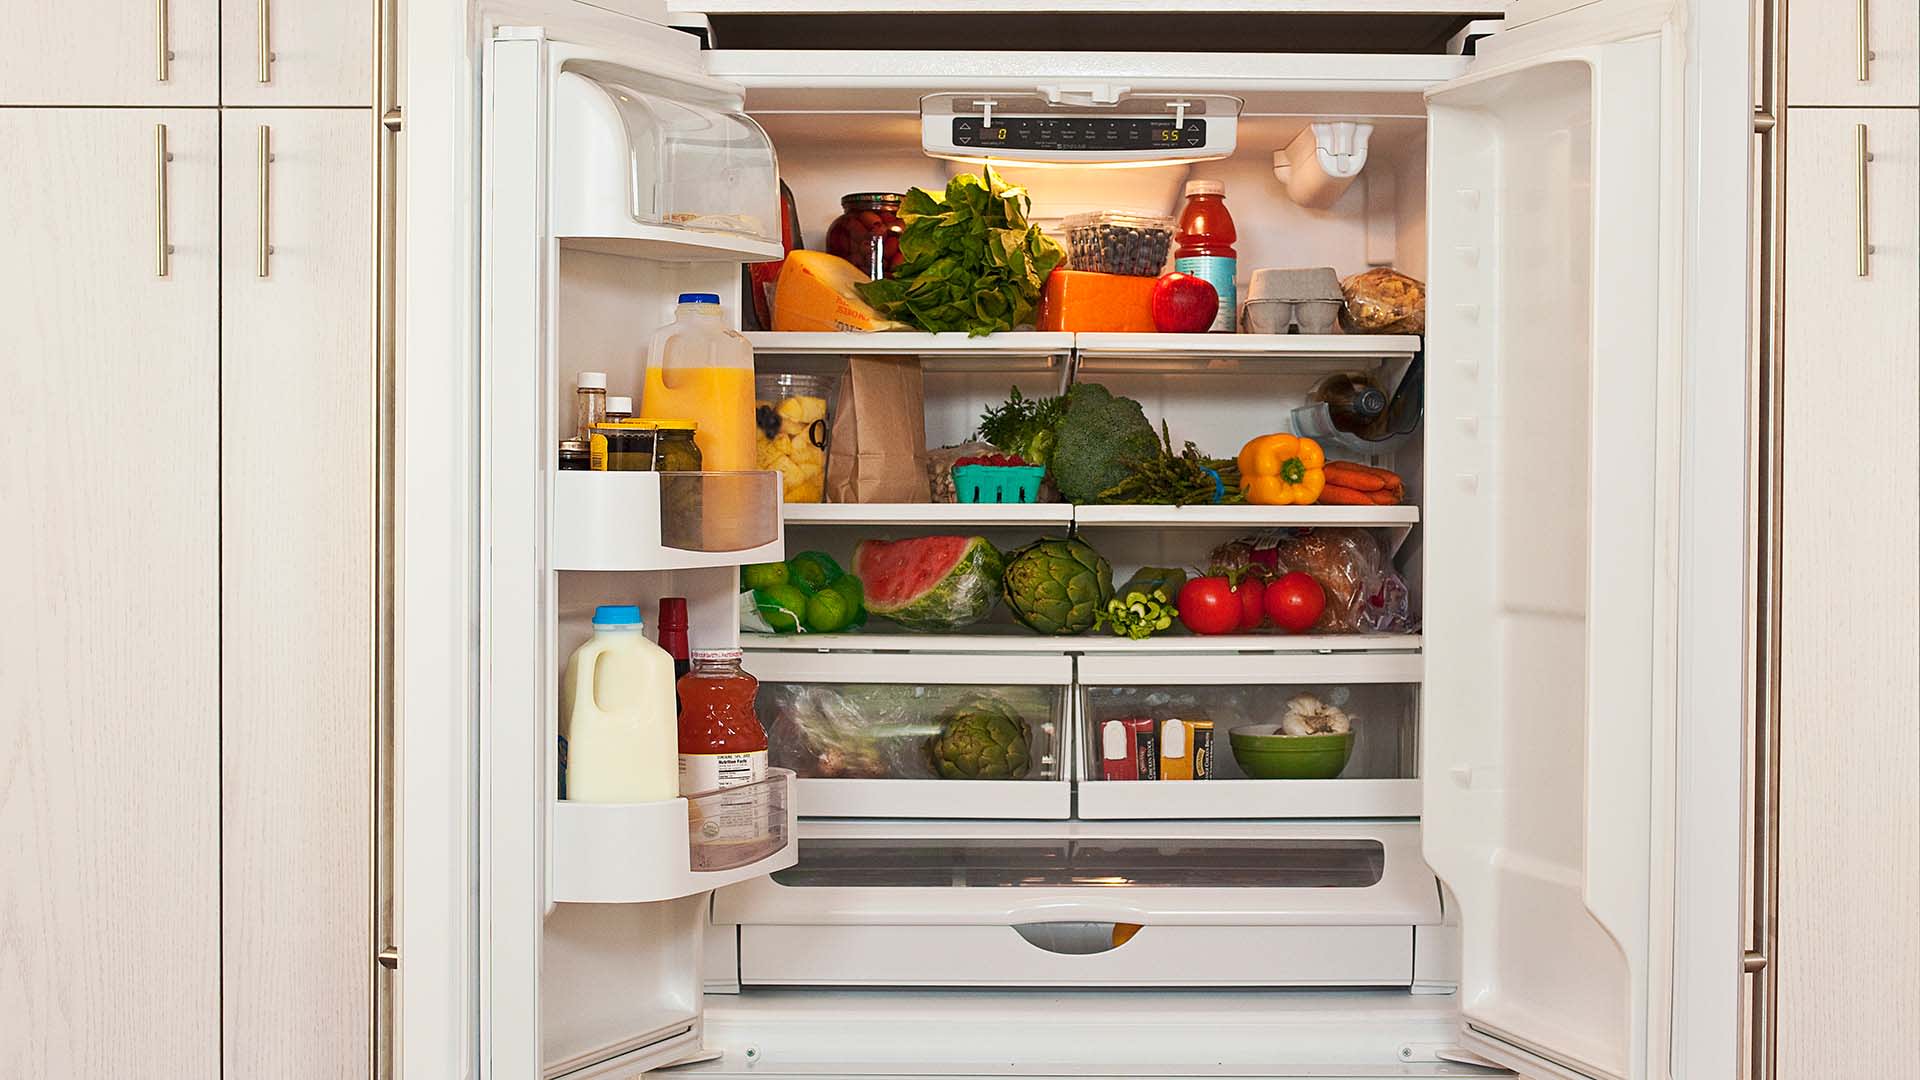 How to Use the Contents of Your Fridge to Boost Your Creativity, According to the Director of Stanford's Design School